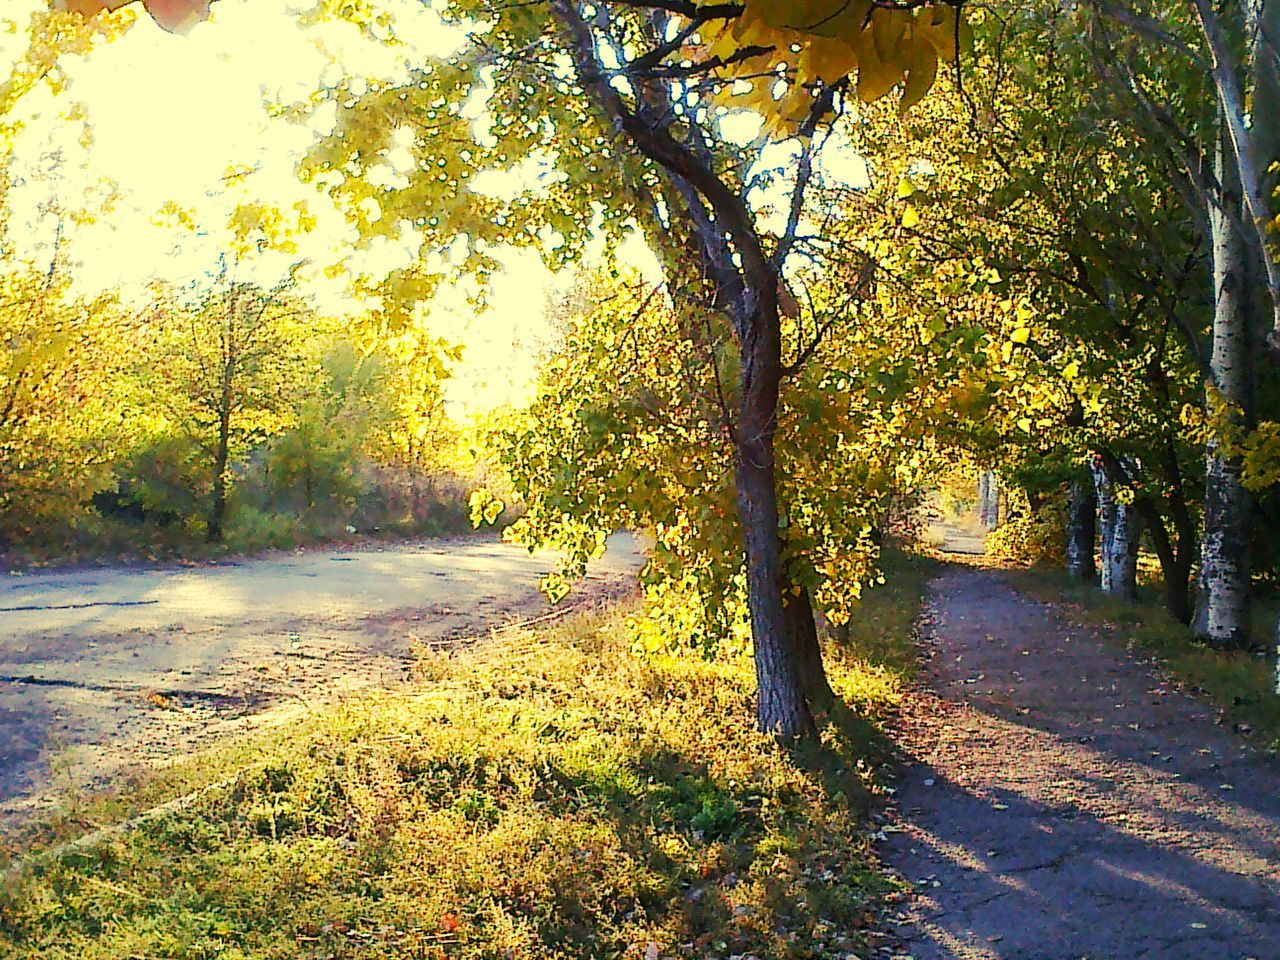 tree, the way forward, yellow, growth, road, autumn, street, transportation, nature, diminishing perspective, sunlight, tranquility, footpath, change, leaf, branch, plant, empty road, outdoors, day